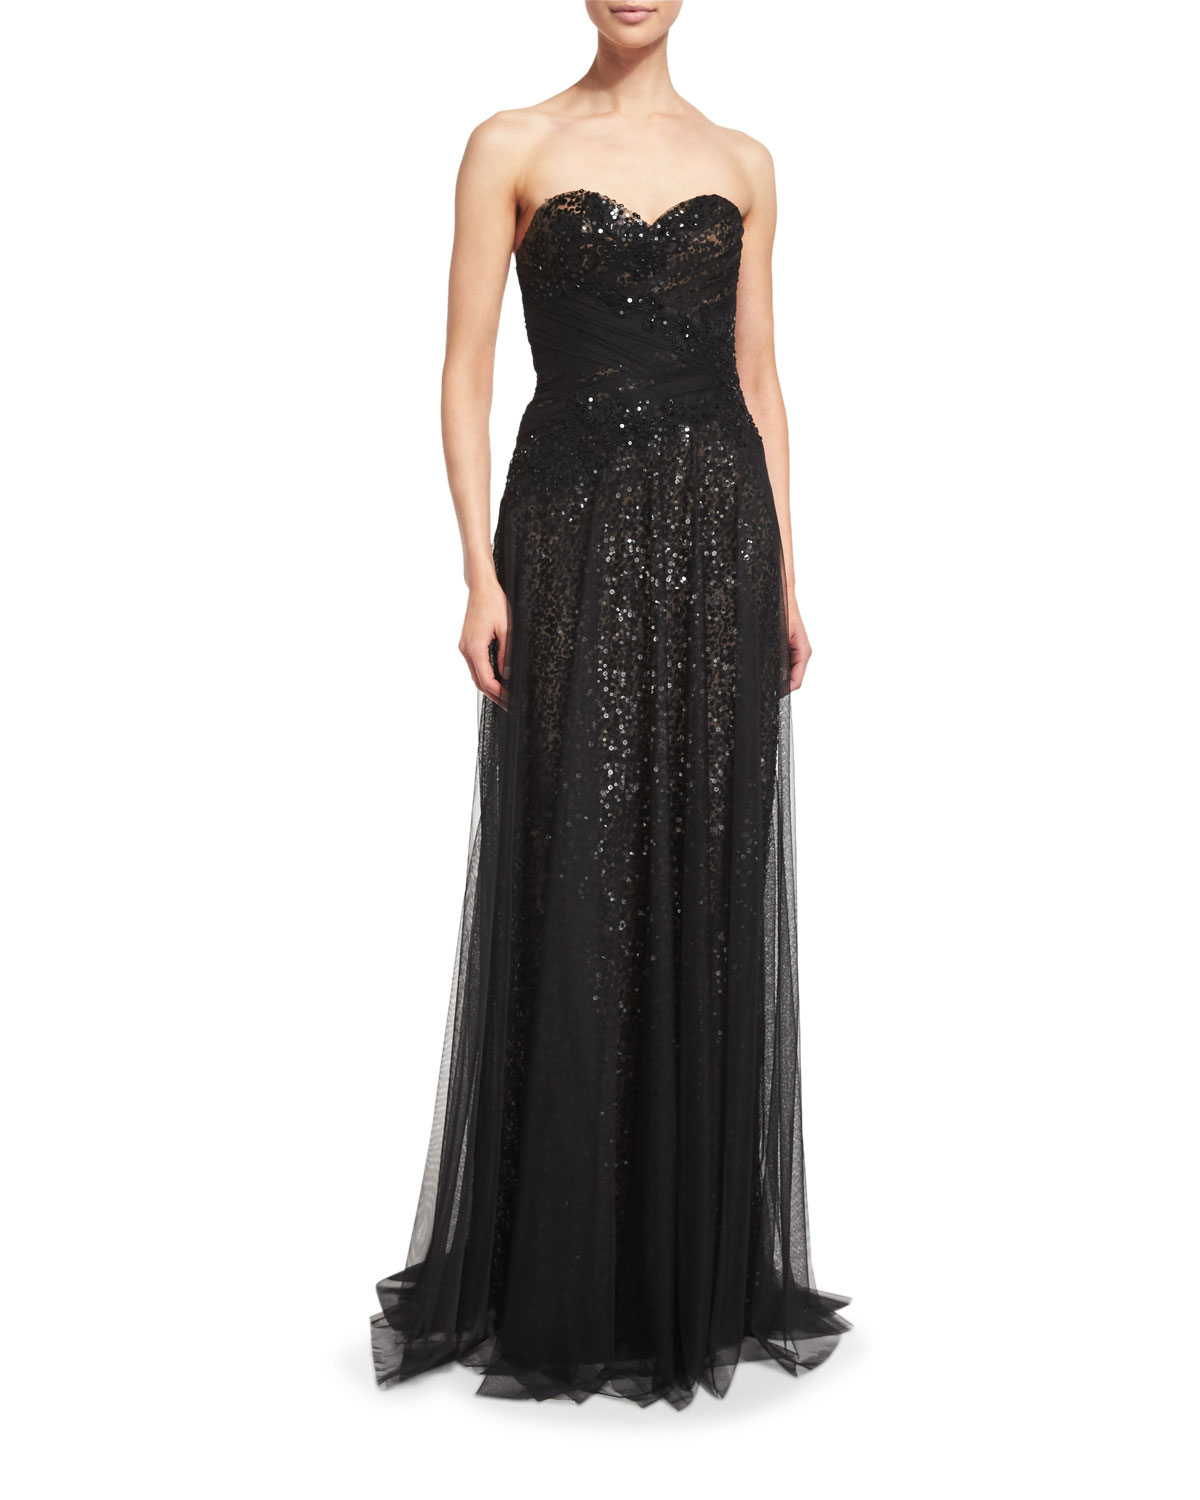 Lyst - Notte By Marchesa Strapless Sequined Tulle Overlay Gown in Black